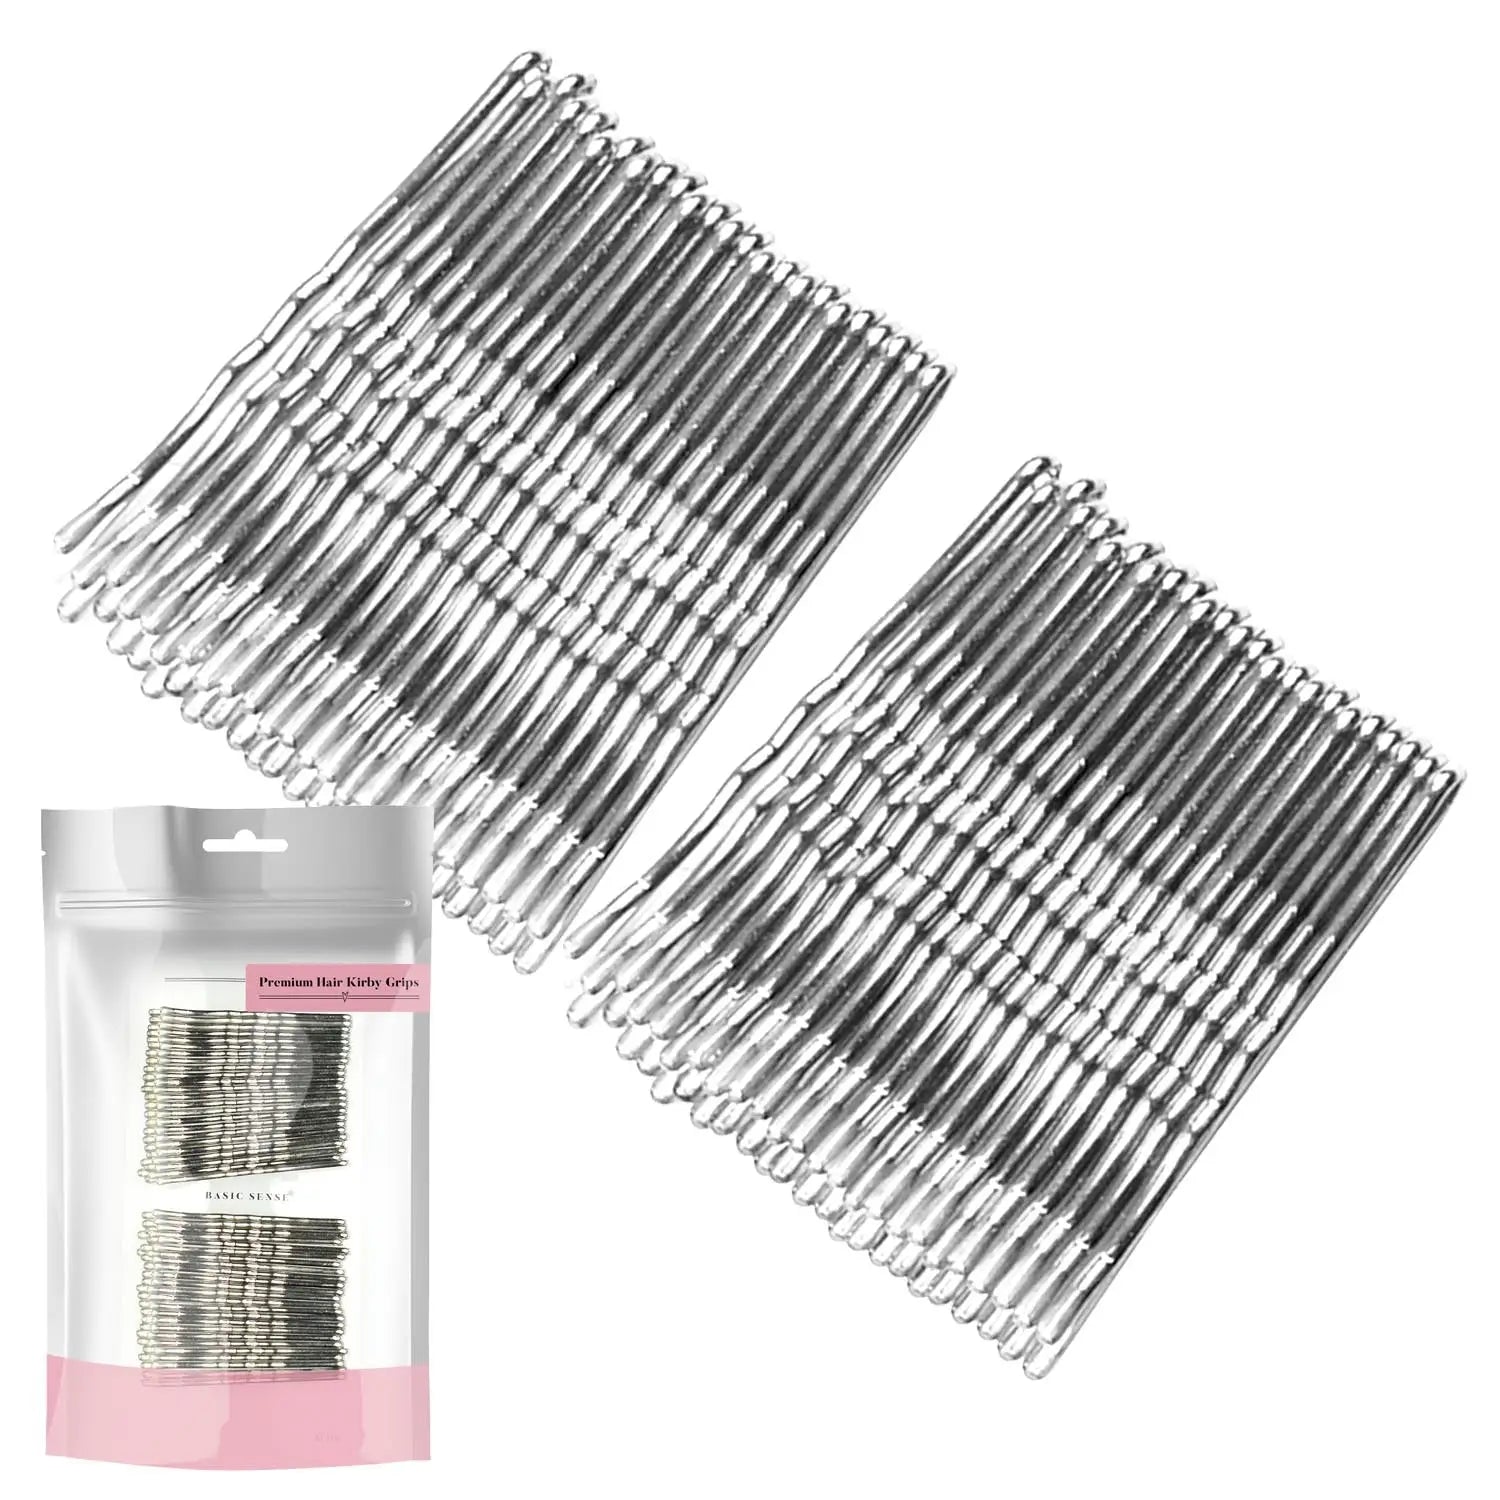 Sturdy metal wavy bobby pins grips in a package